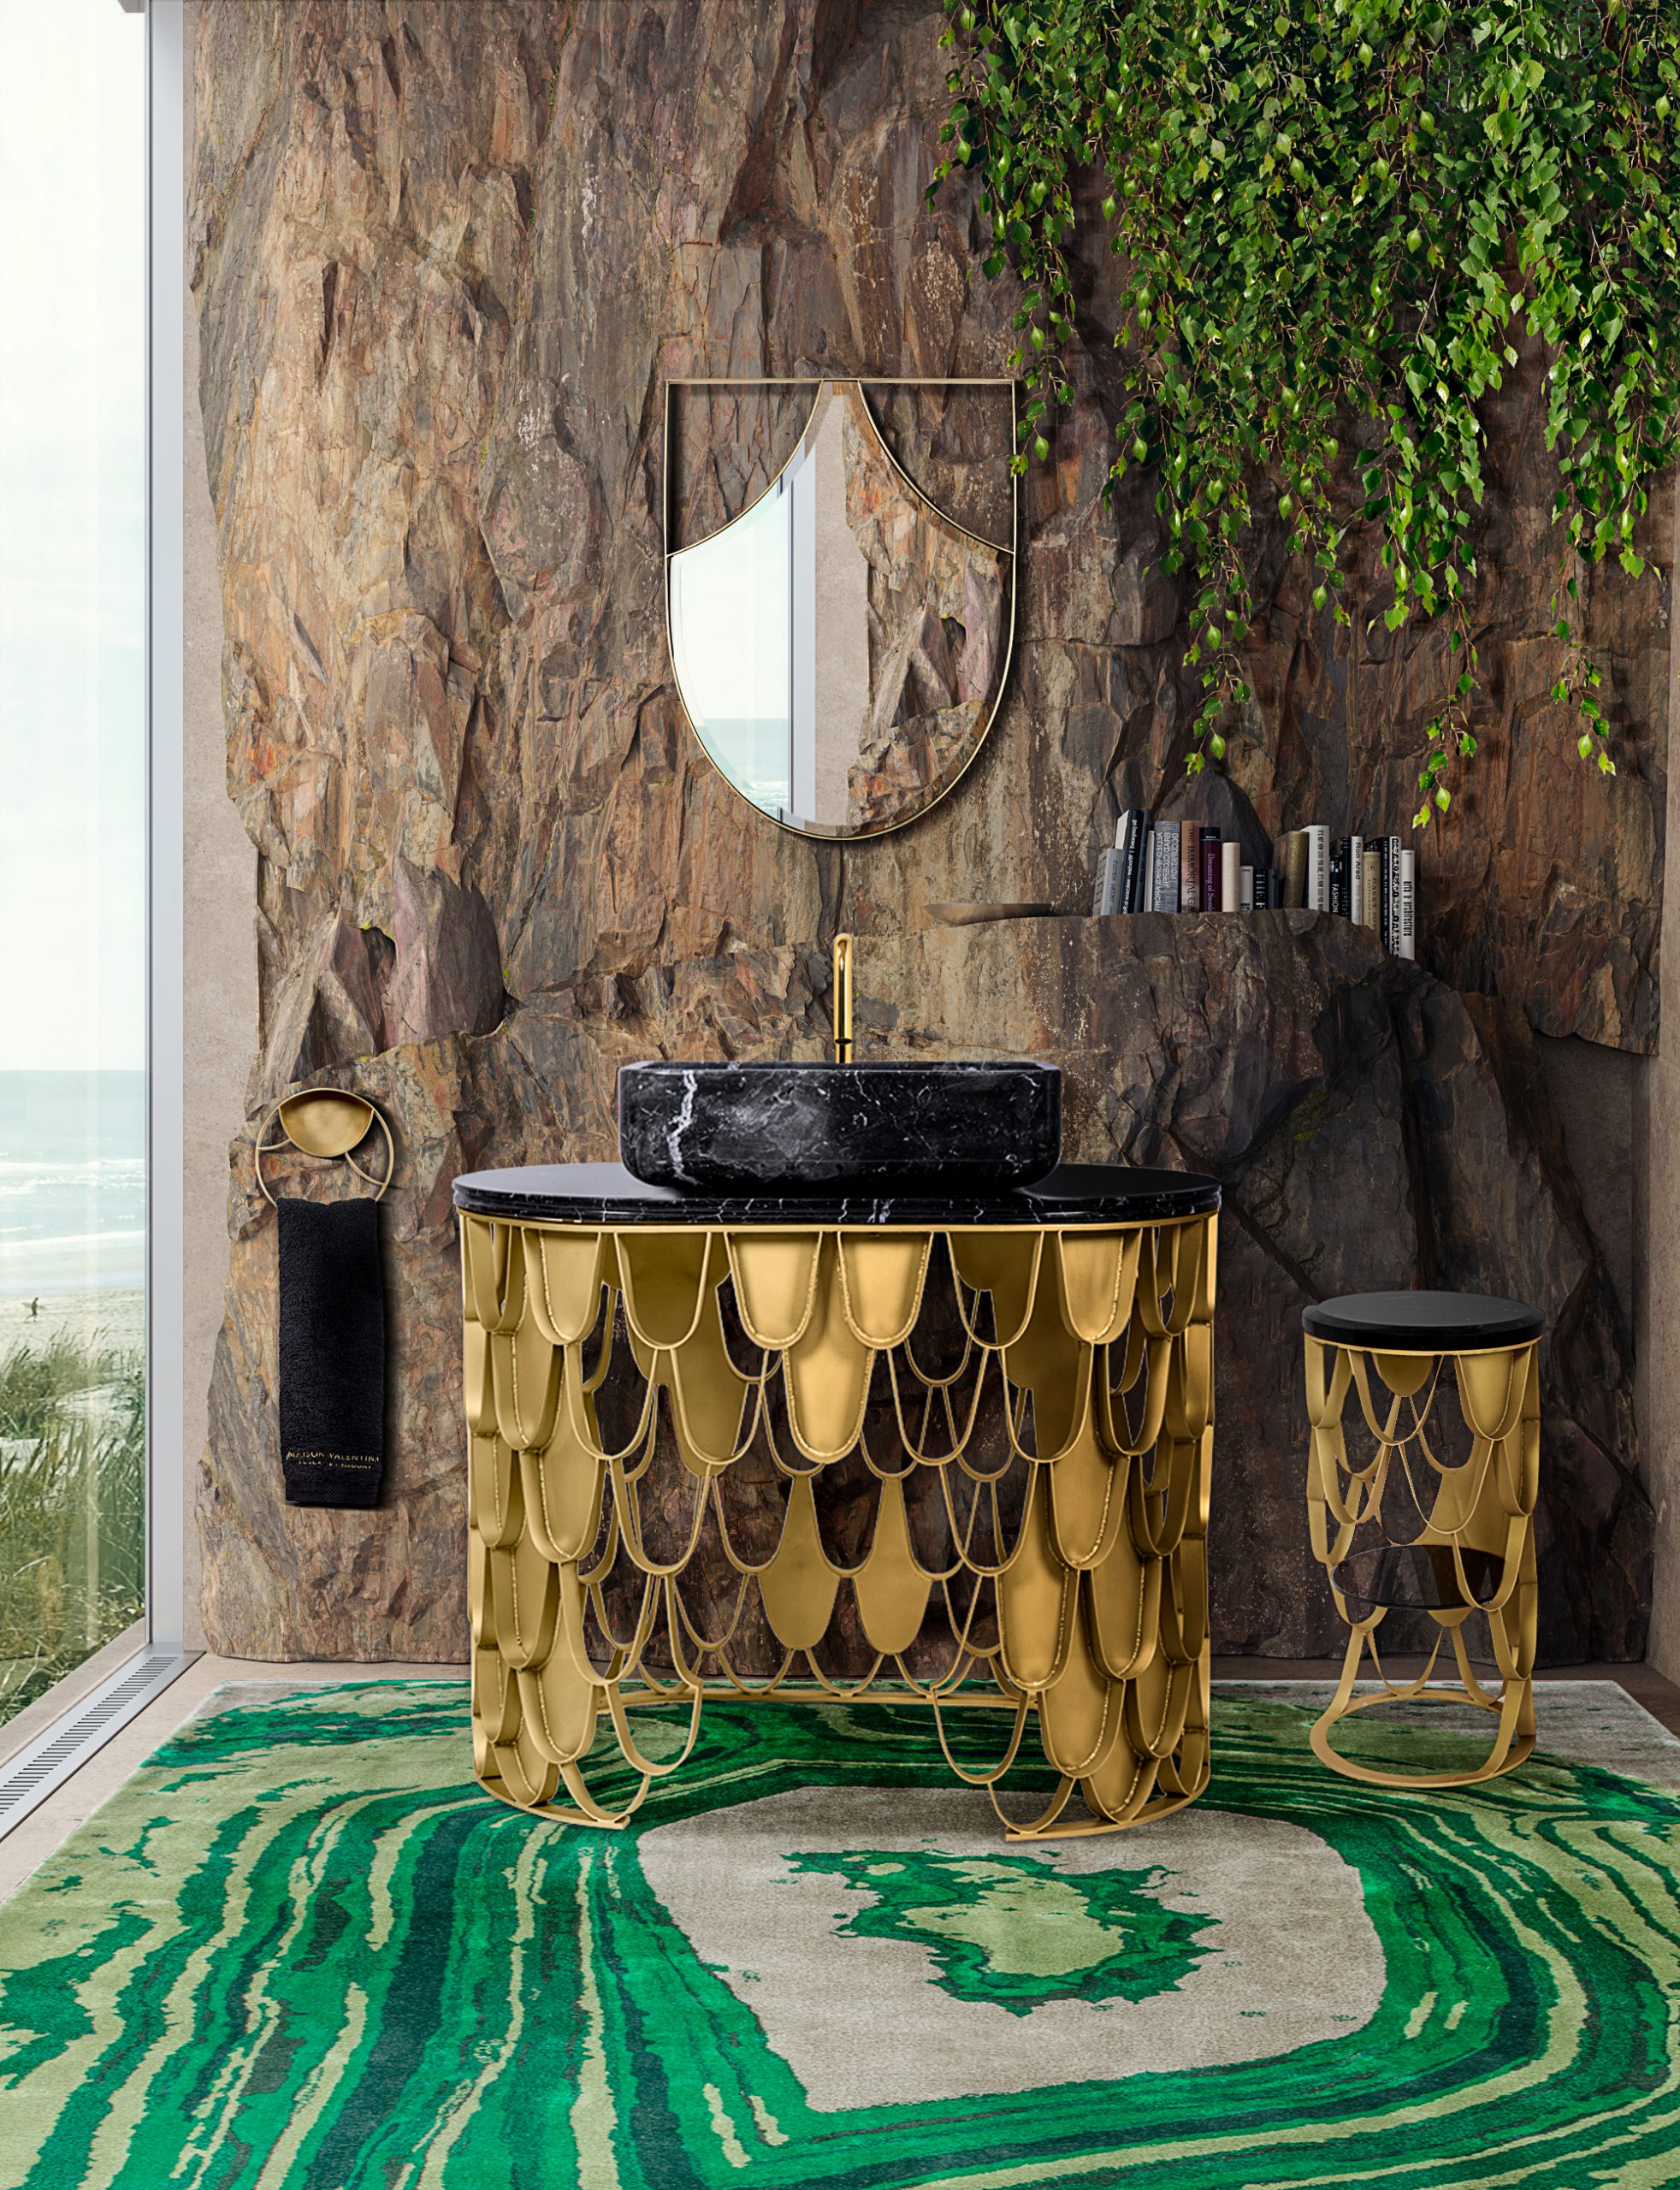 the perfect combination for a soothing and quiet bathroom. This Single Washbasin emerges as an inspirational element as the focal point of this magnificent luxury bathroom.